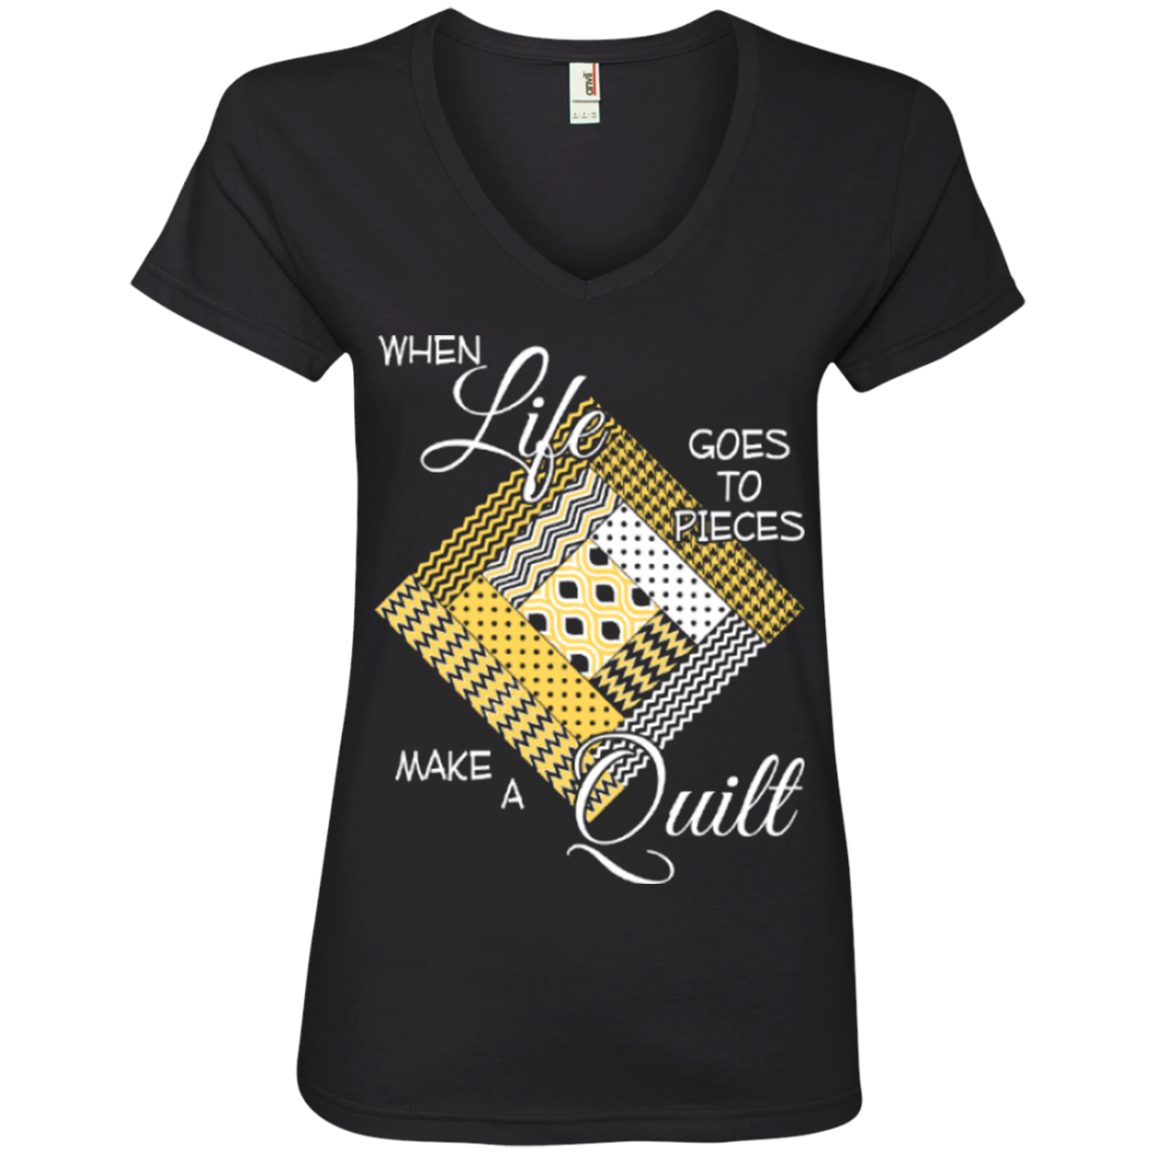 Make a Quilt (yellow) Ladies V-Neck Tee - Crafter4Life - 2